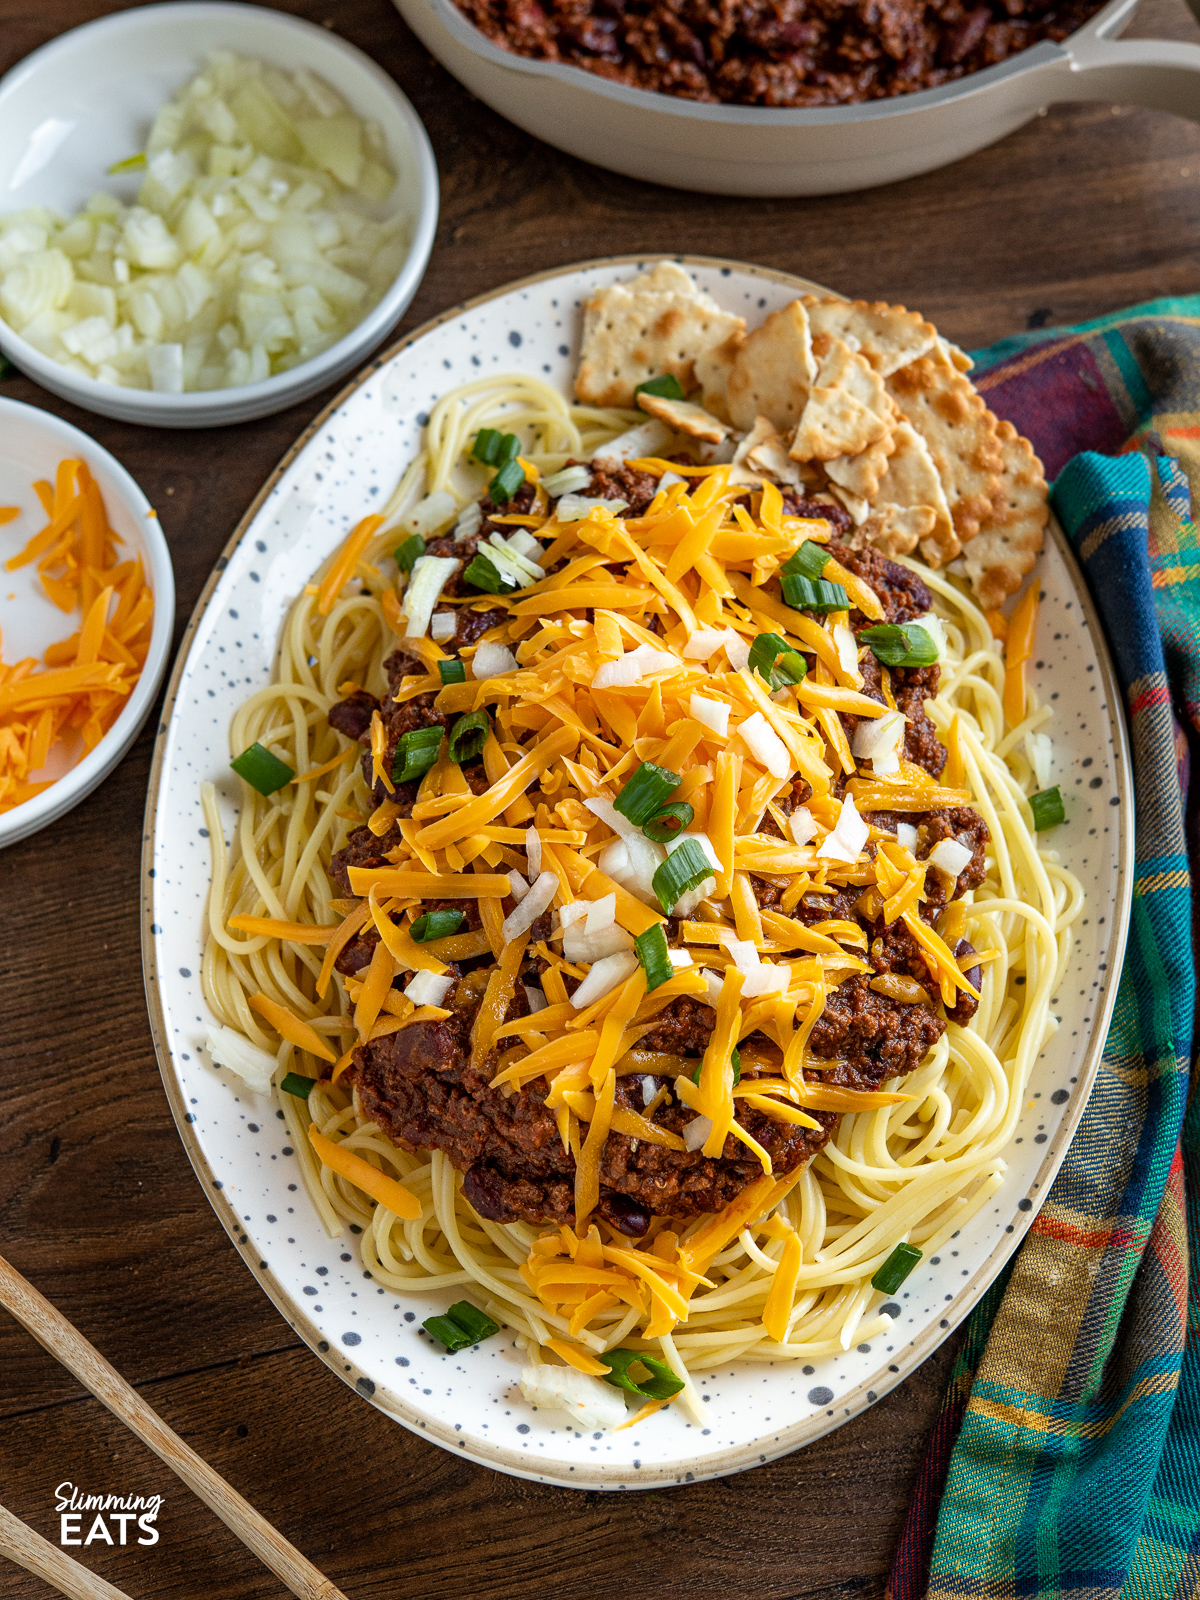 Cincinnati Chili on spotted oval plate with spaghetti and toppings of cheese, onions and salted crackers